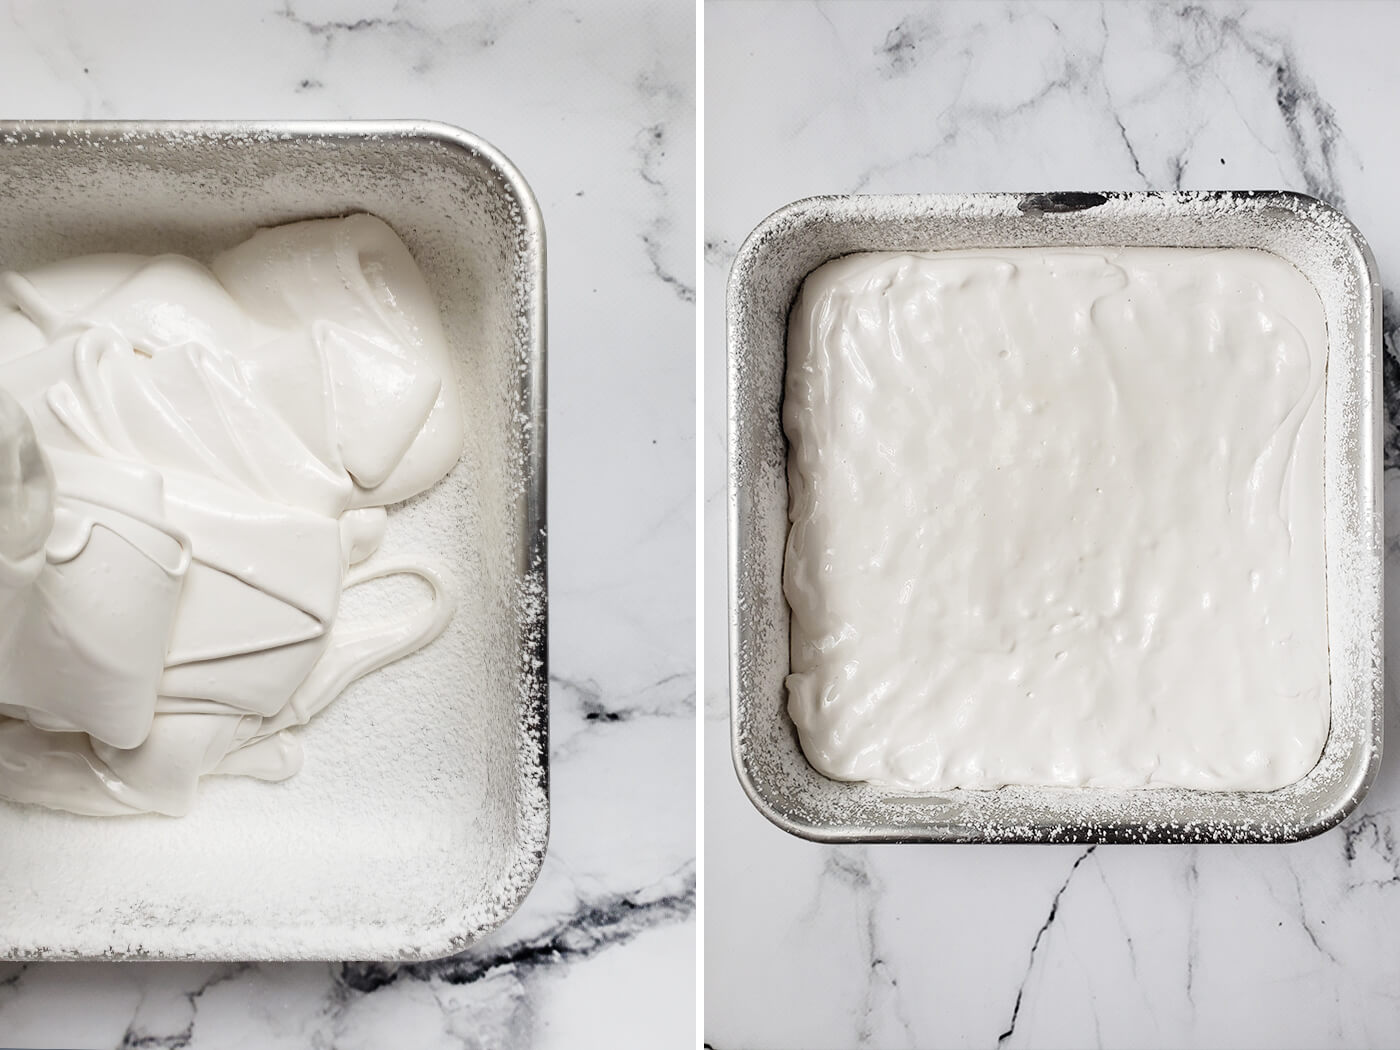 Fluffy, Homemade (and Halal!) Marshmallows